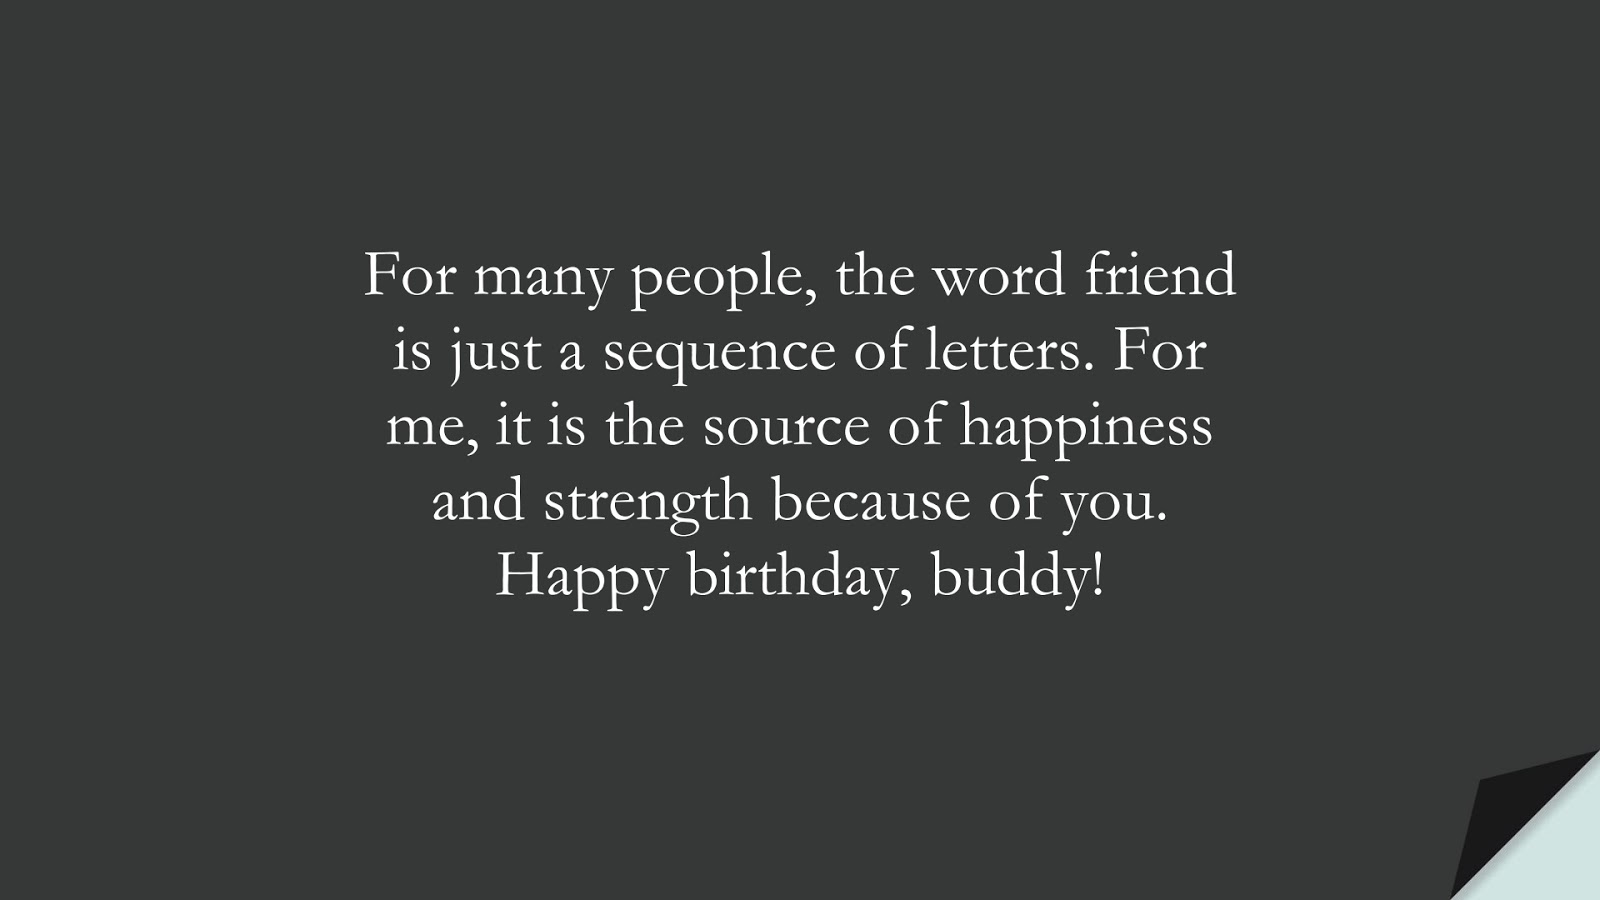 For many people, the word friend is just a sequence of letters. For me, it is the source of happiness and strength because of you. Happy birthday, buddy!FALSE